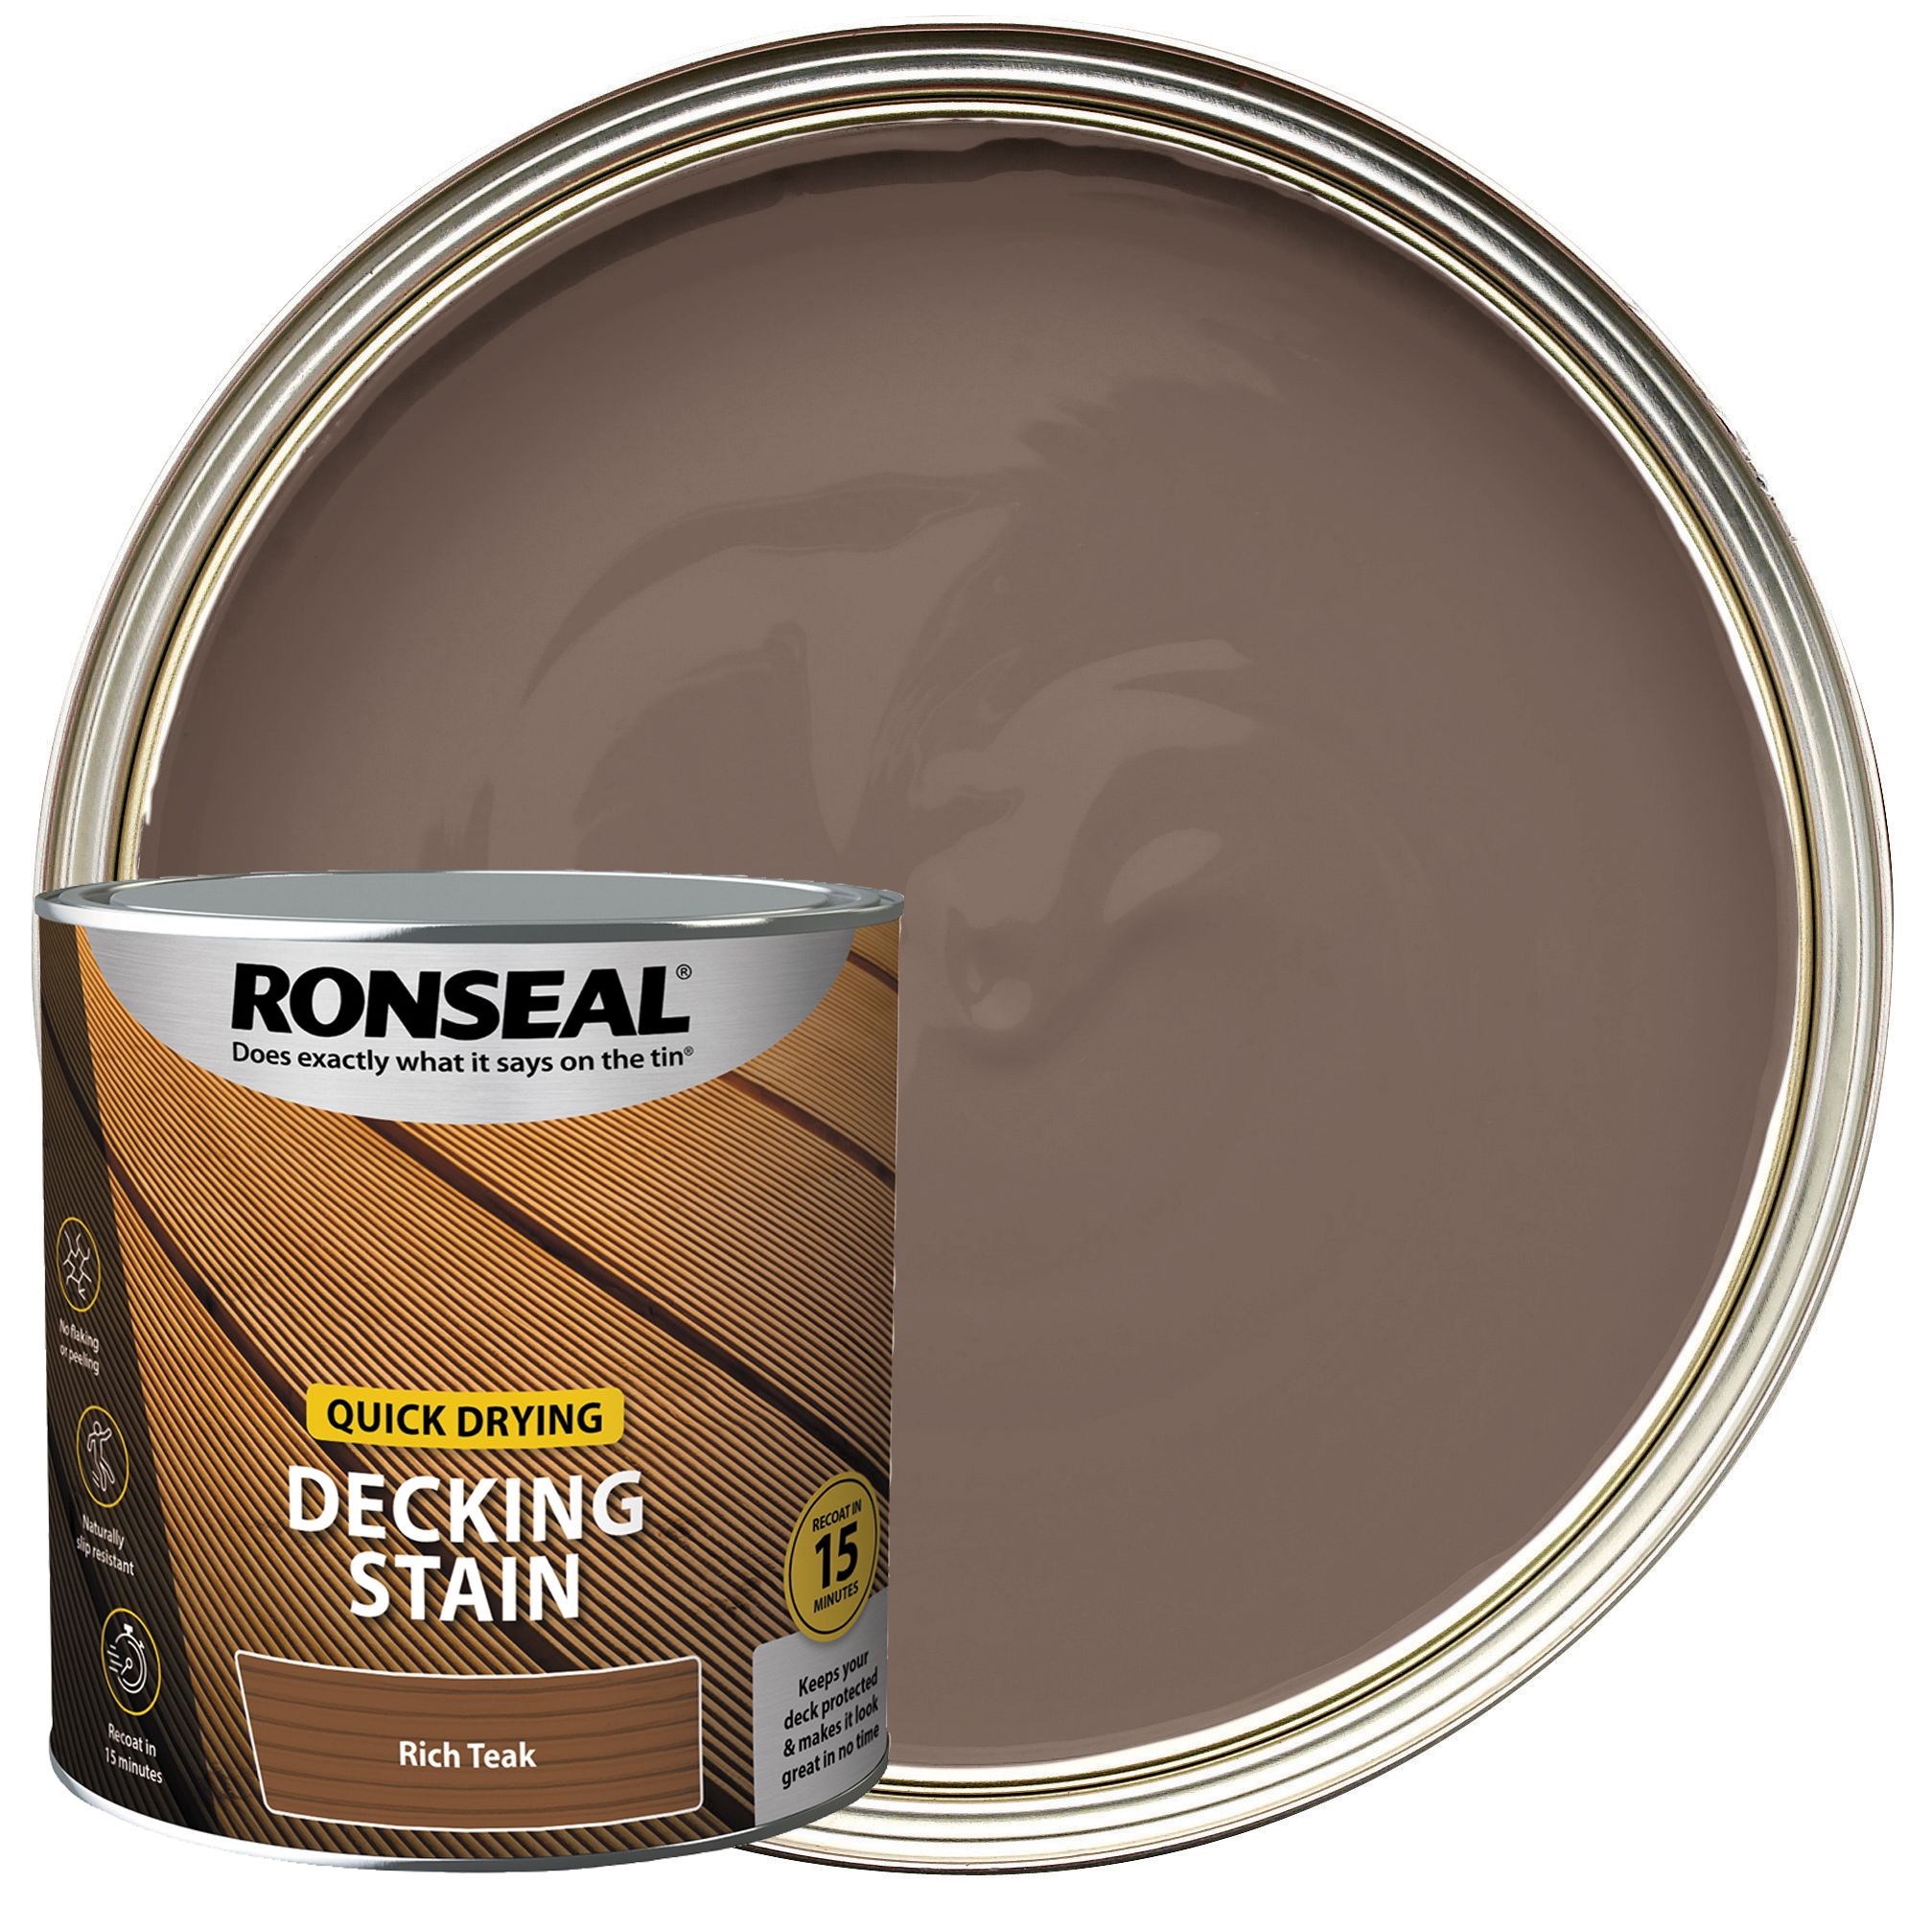 Ronseal Rich Teak Quick Drying Decking Stain - 2.5L